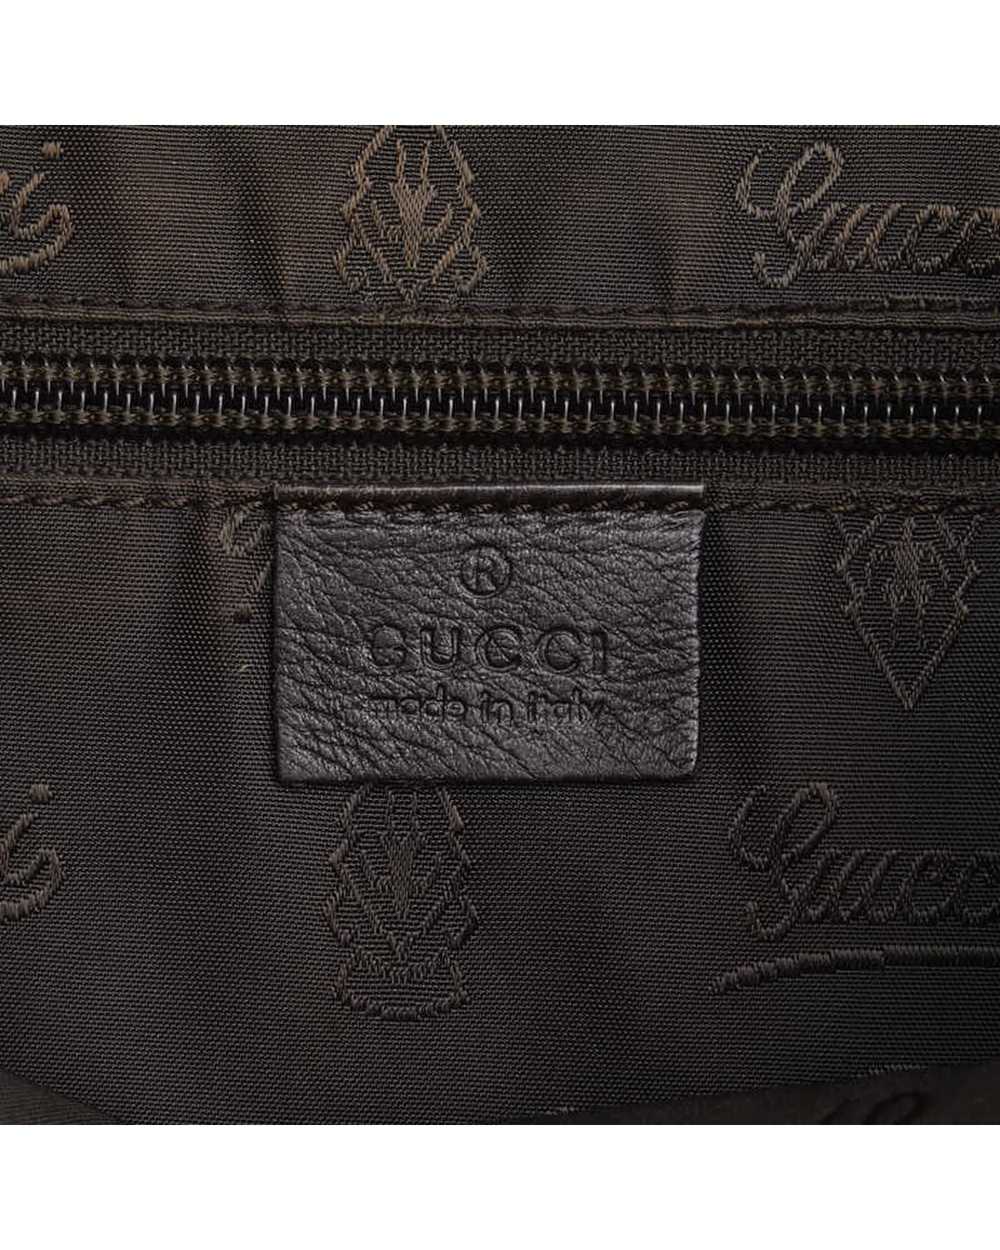 Gucci Brown Guccissima Messenger Bag in AB Condit… - image 8